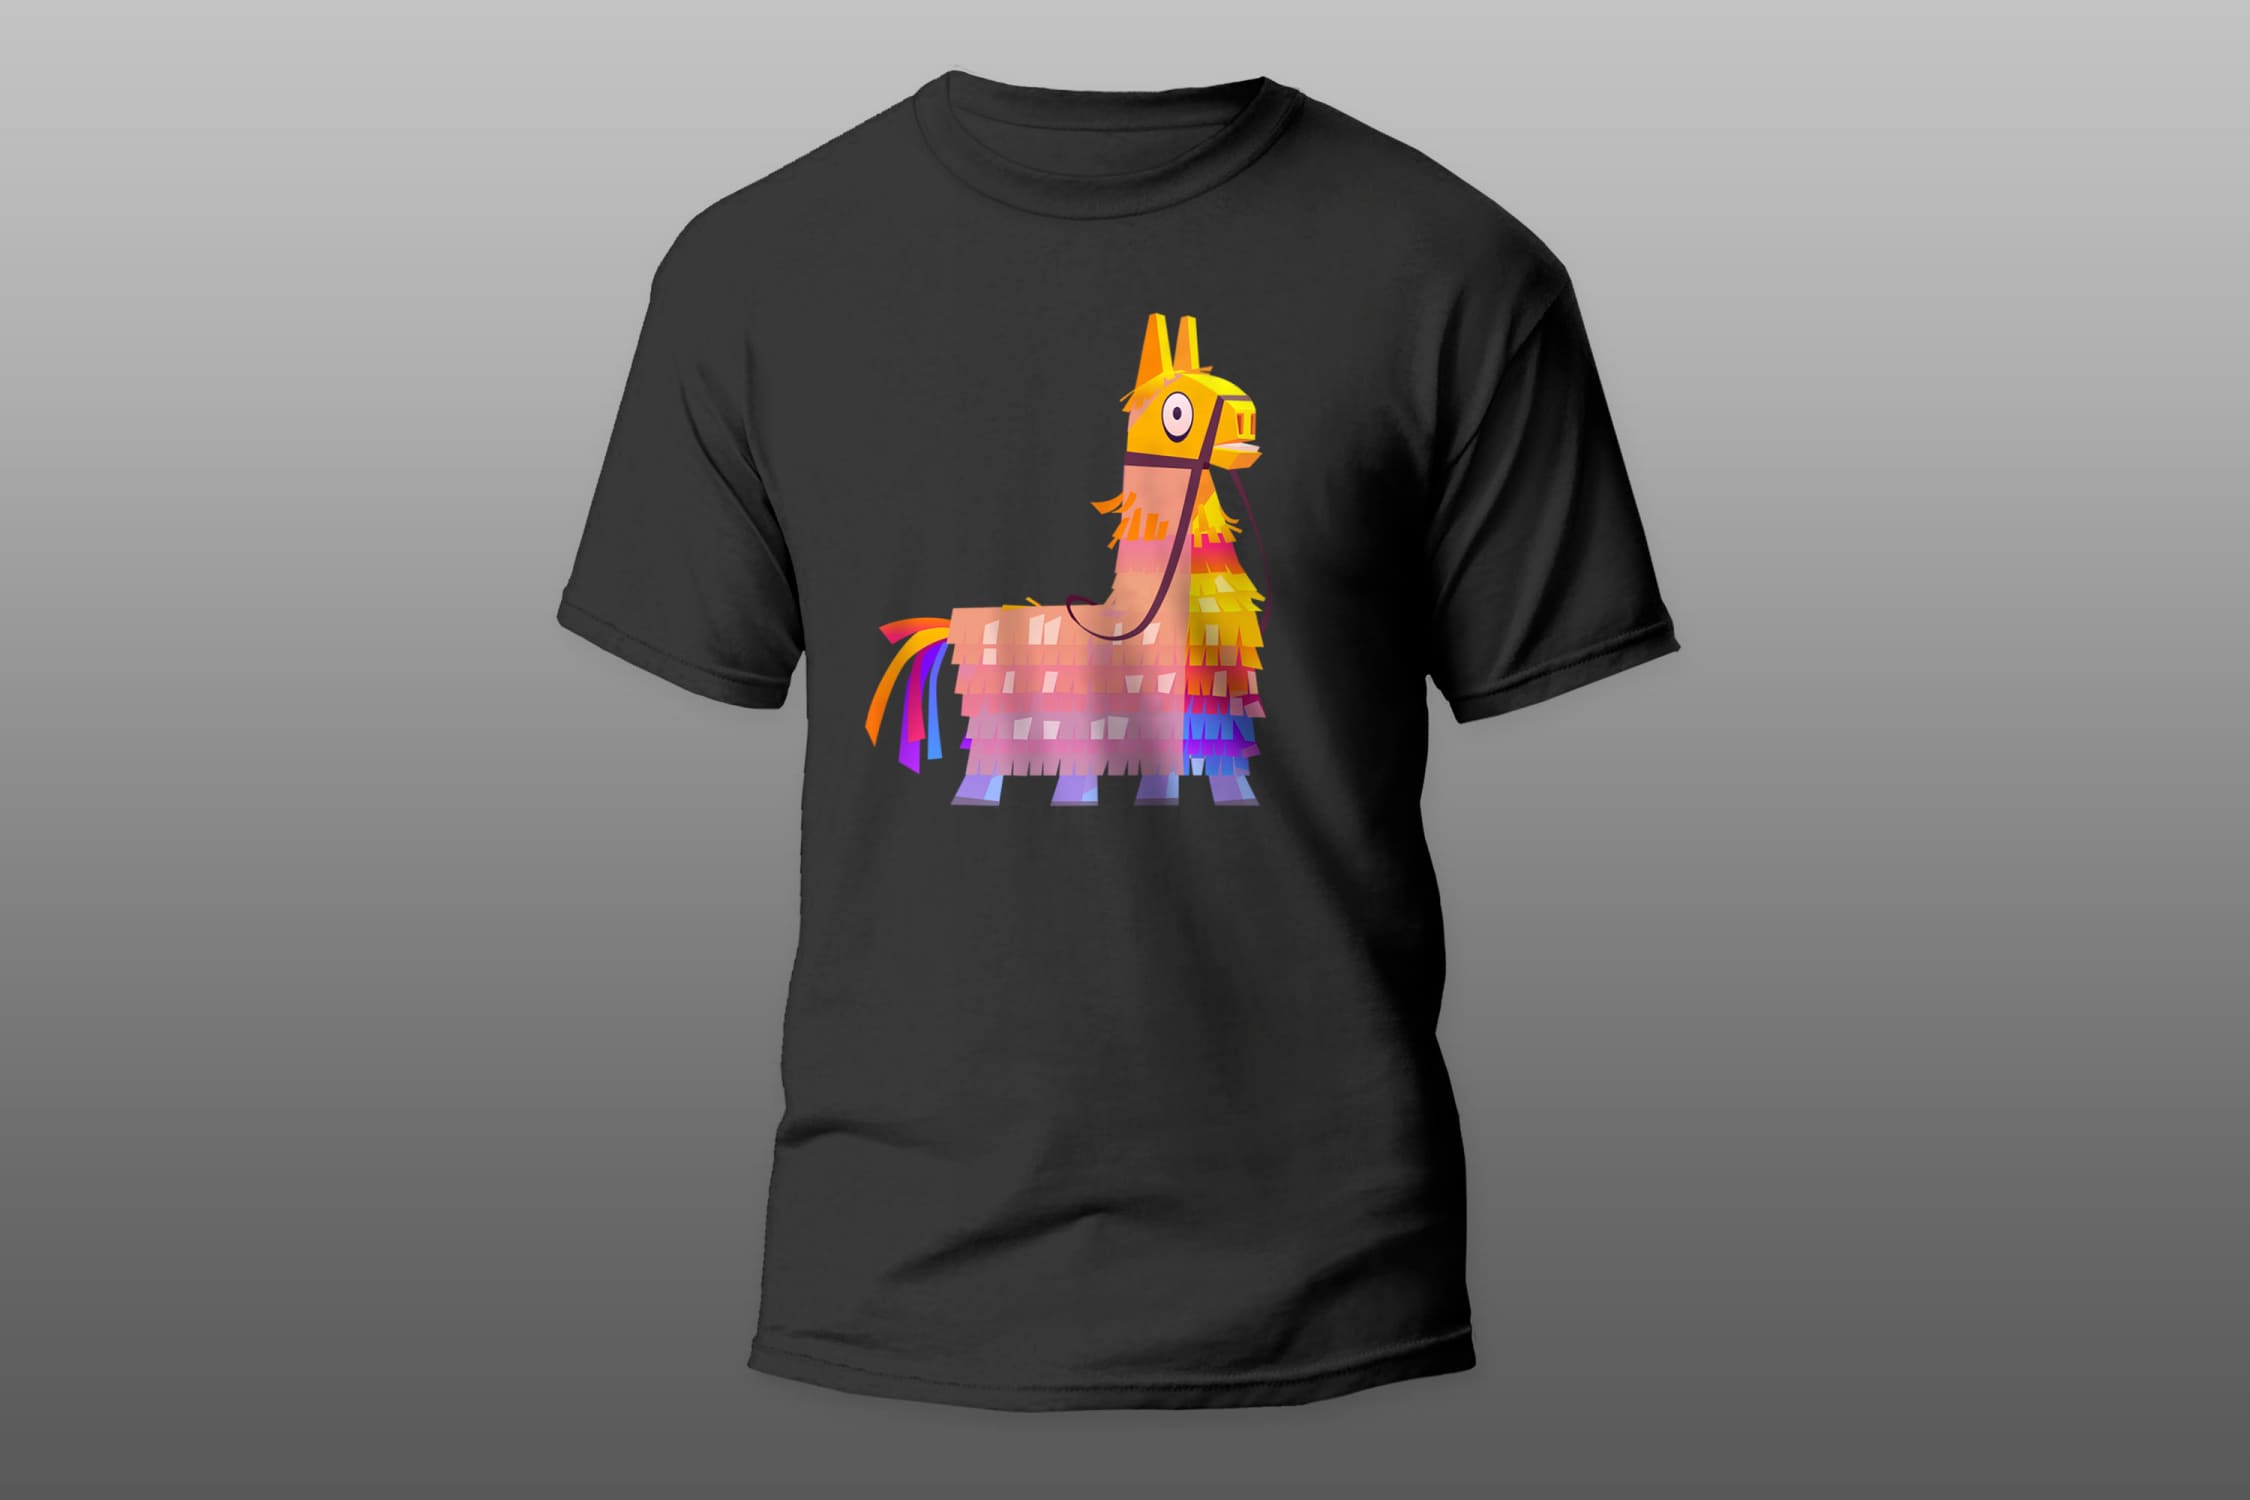 Black t-shirt with a colorful llama on a gray gradient background.